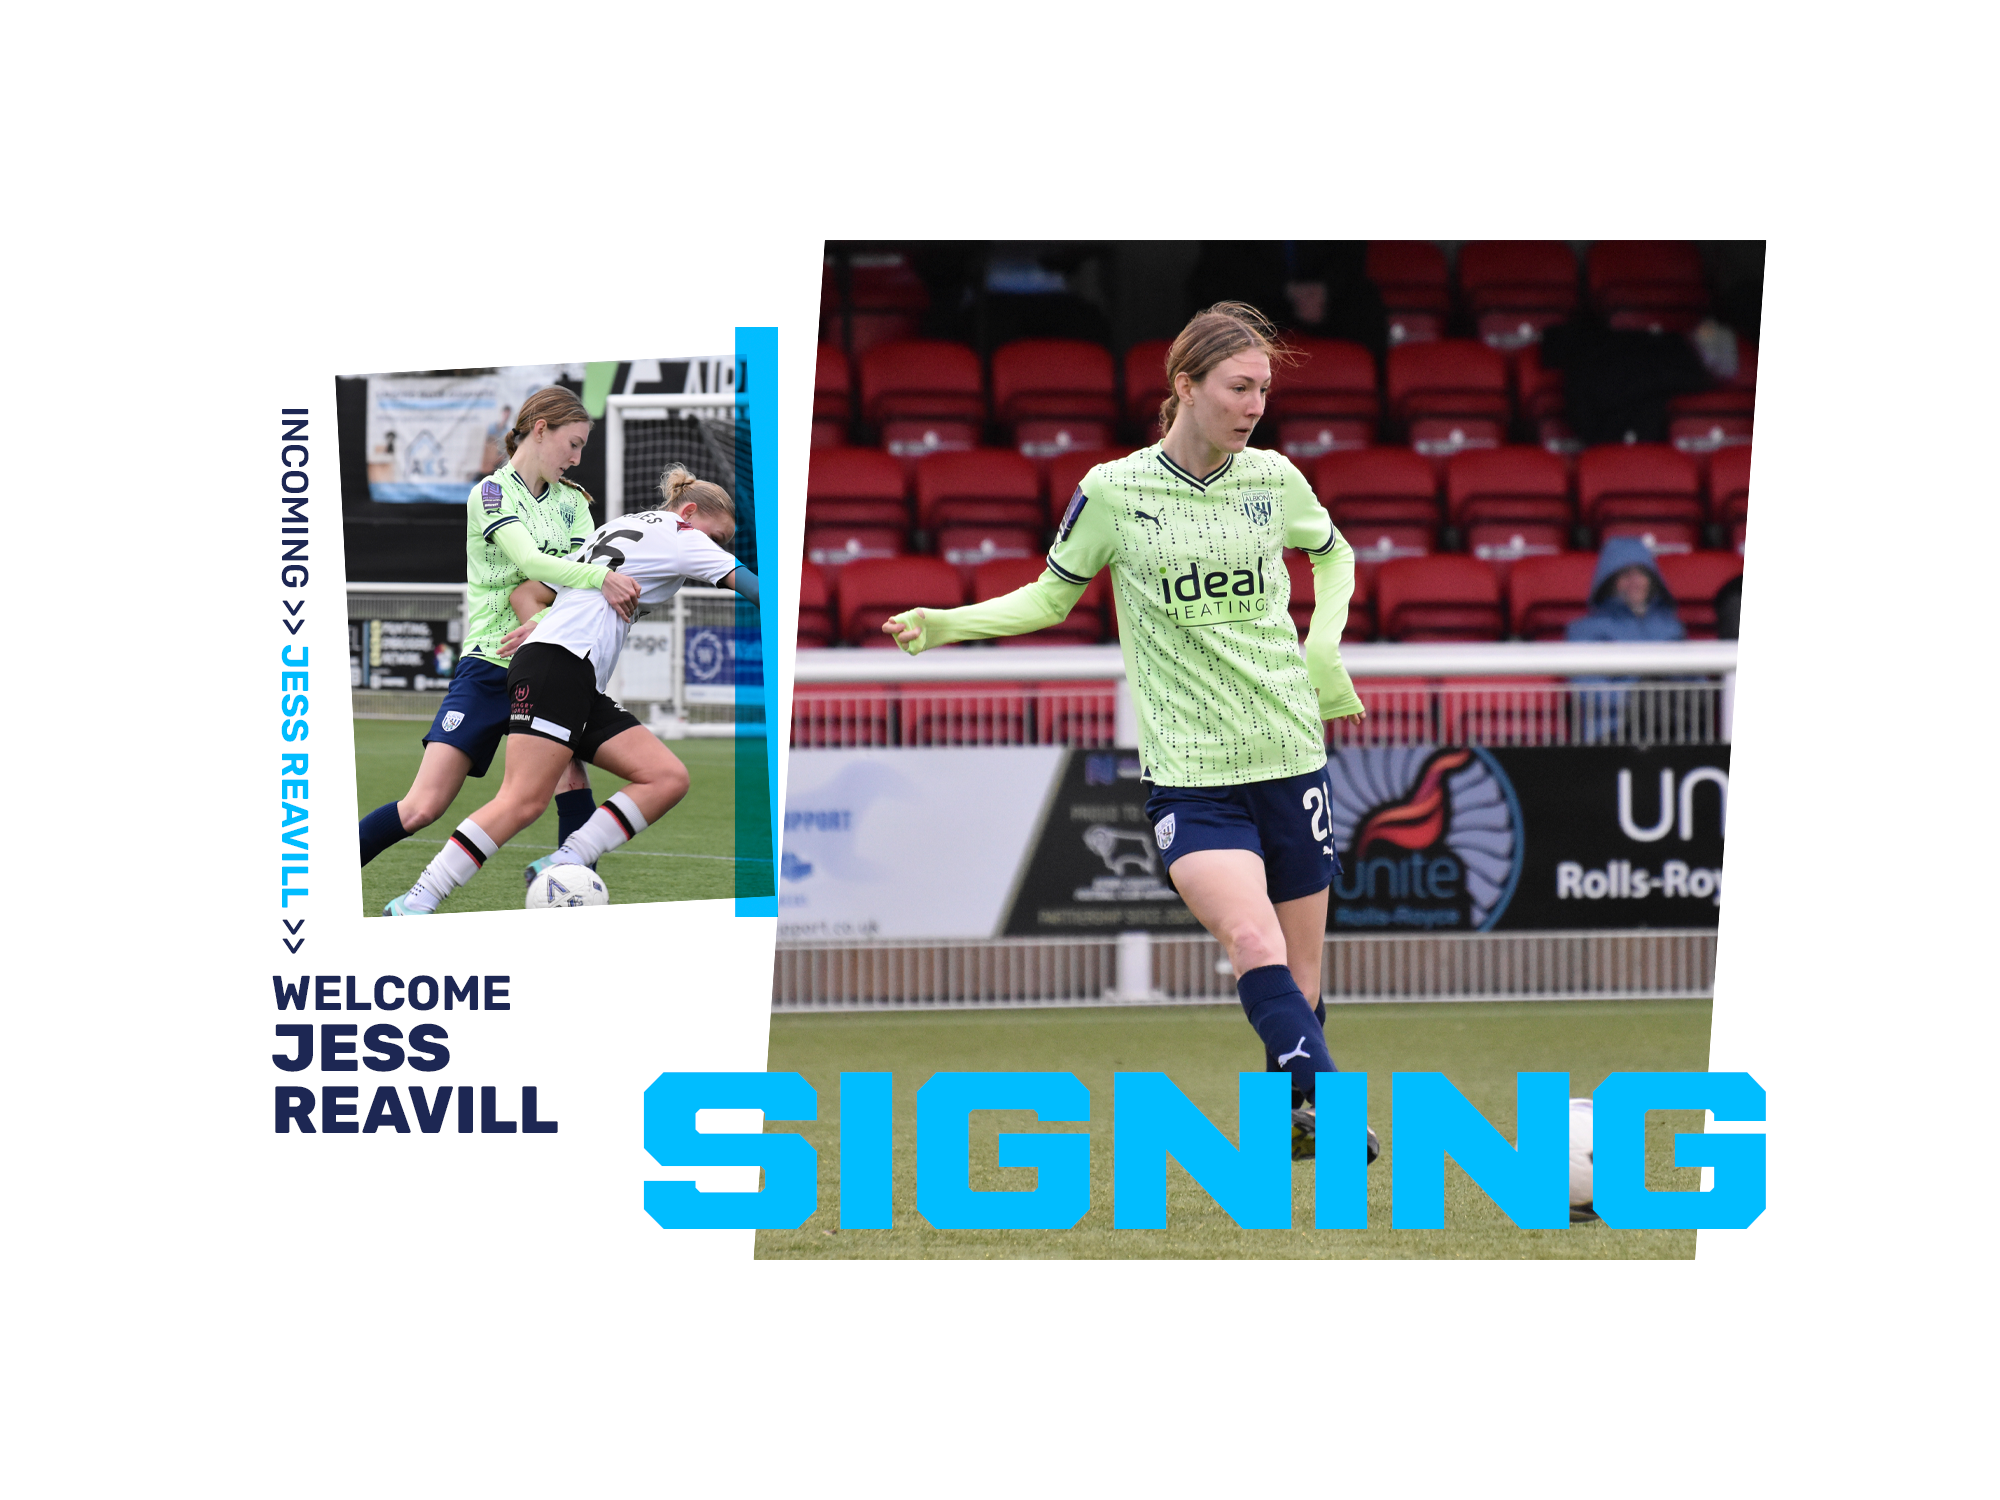 A graphic showing Albion Women's new signing, Jess Reavill